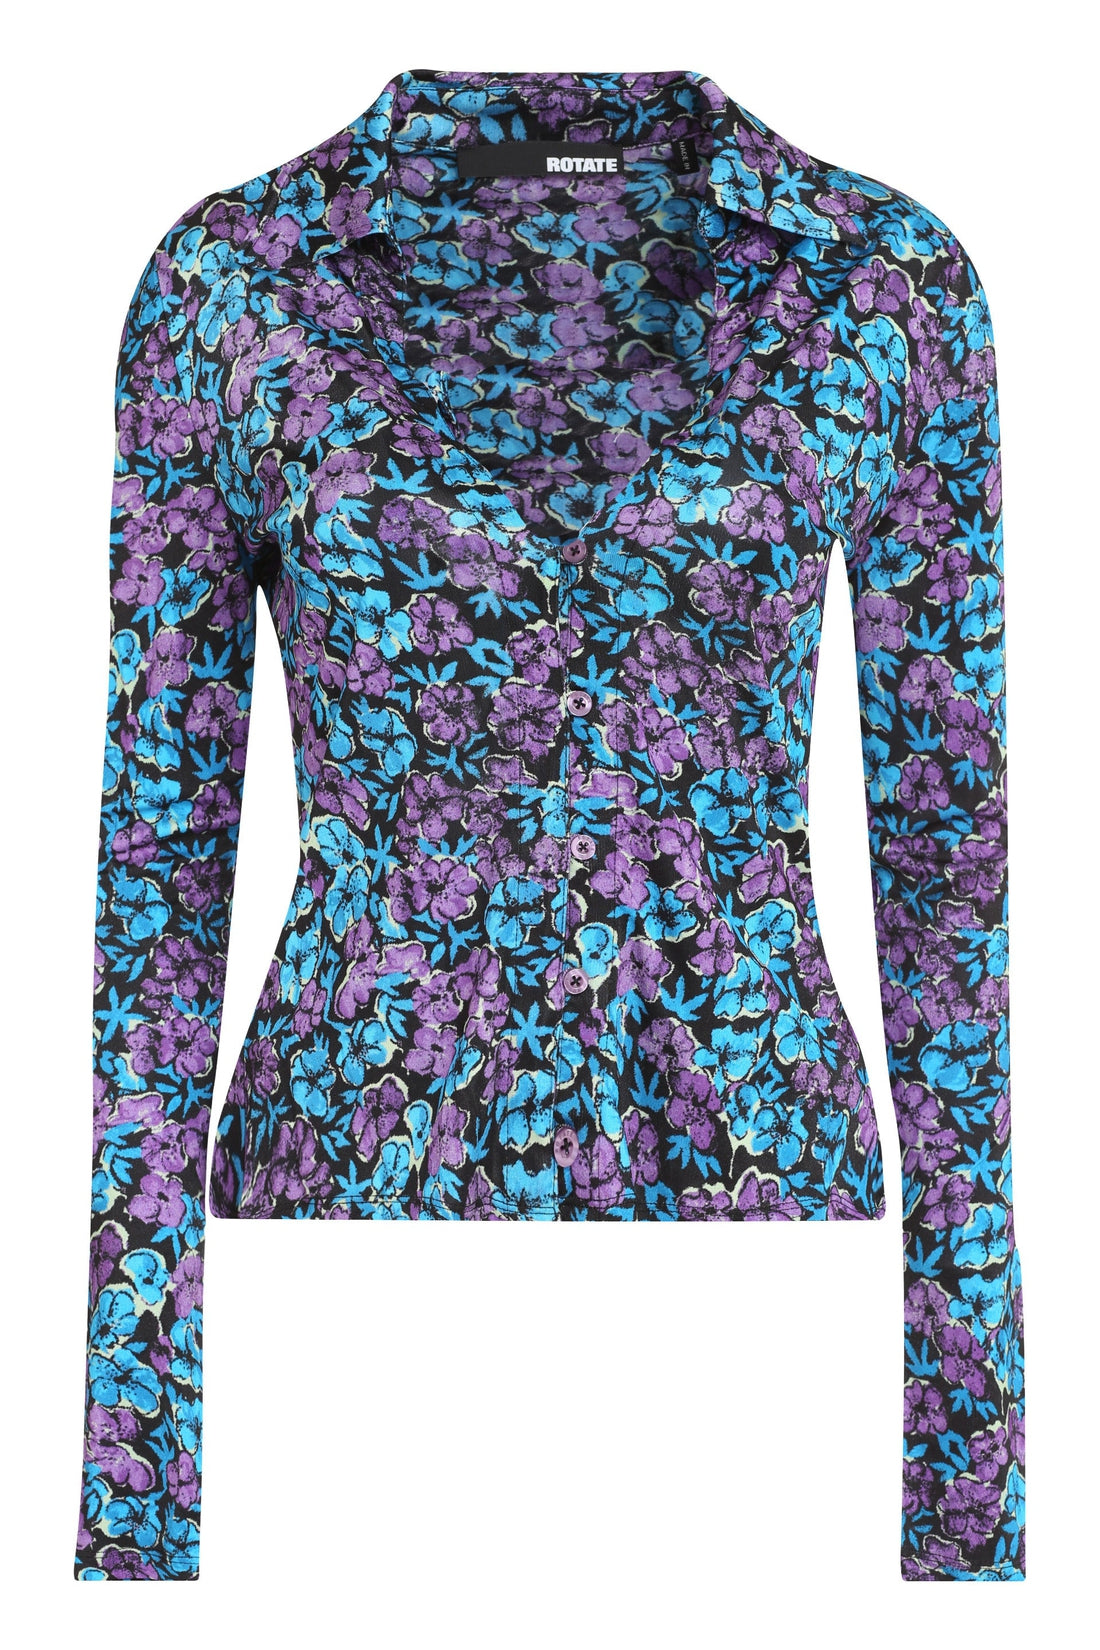 Piralo-OUTLET-SALE-Mariah printed long-sleeve top-ARCHIVIST